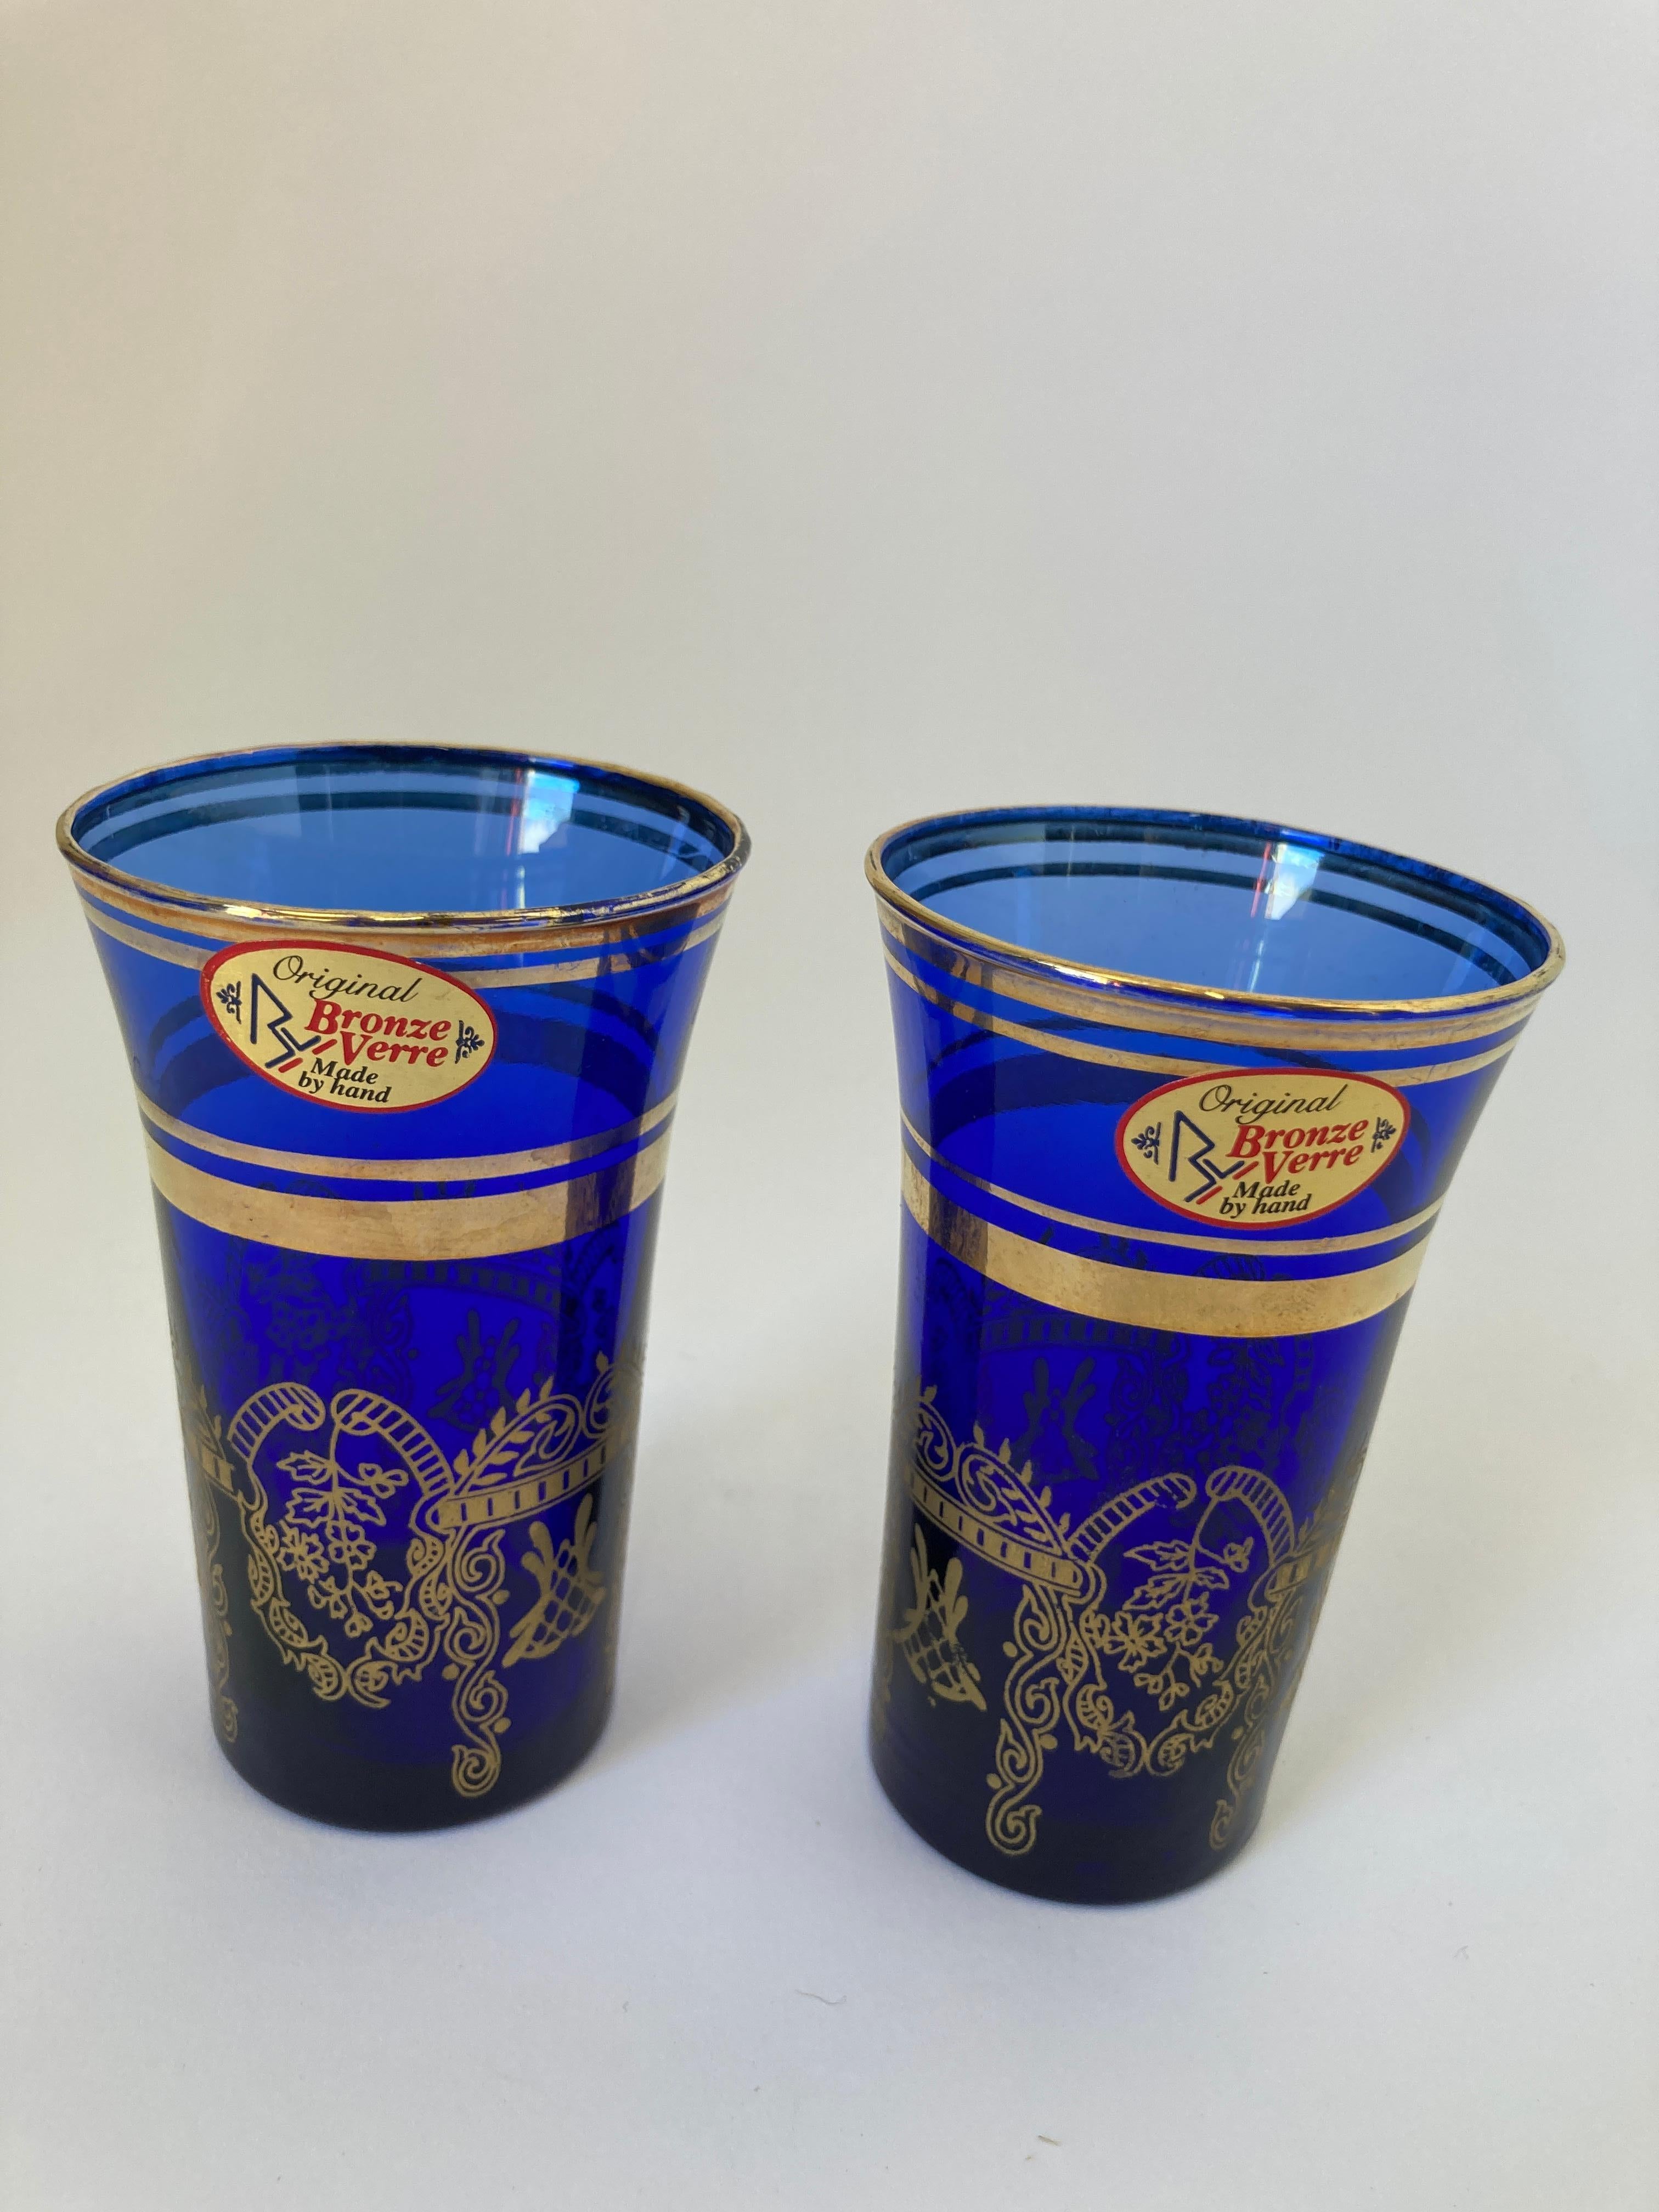 Set of 2 royal blue and gold handblown Moorish crystal cobalt blue drinking glasses.
Use them for or any hot or cold drink.
Elegant, classic barware shot crystal glasses very light finely decorated with a classical 22 karat gold Moorish overlay